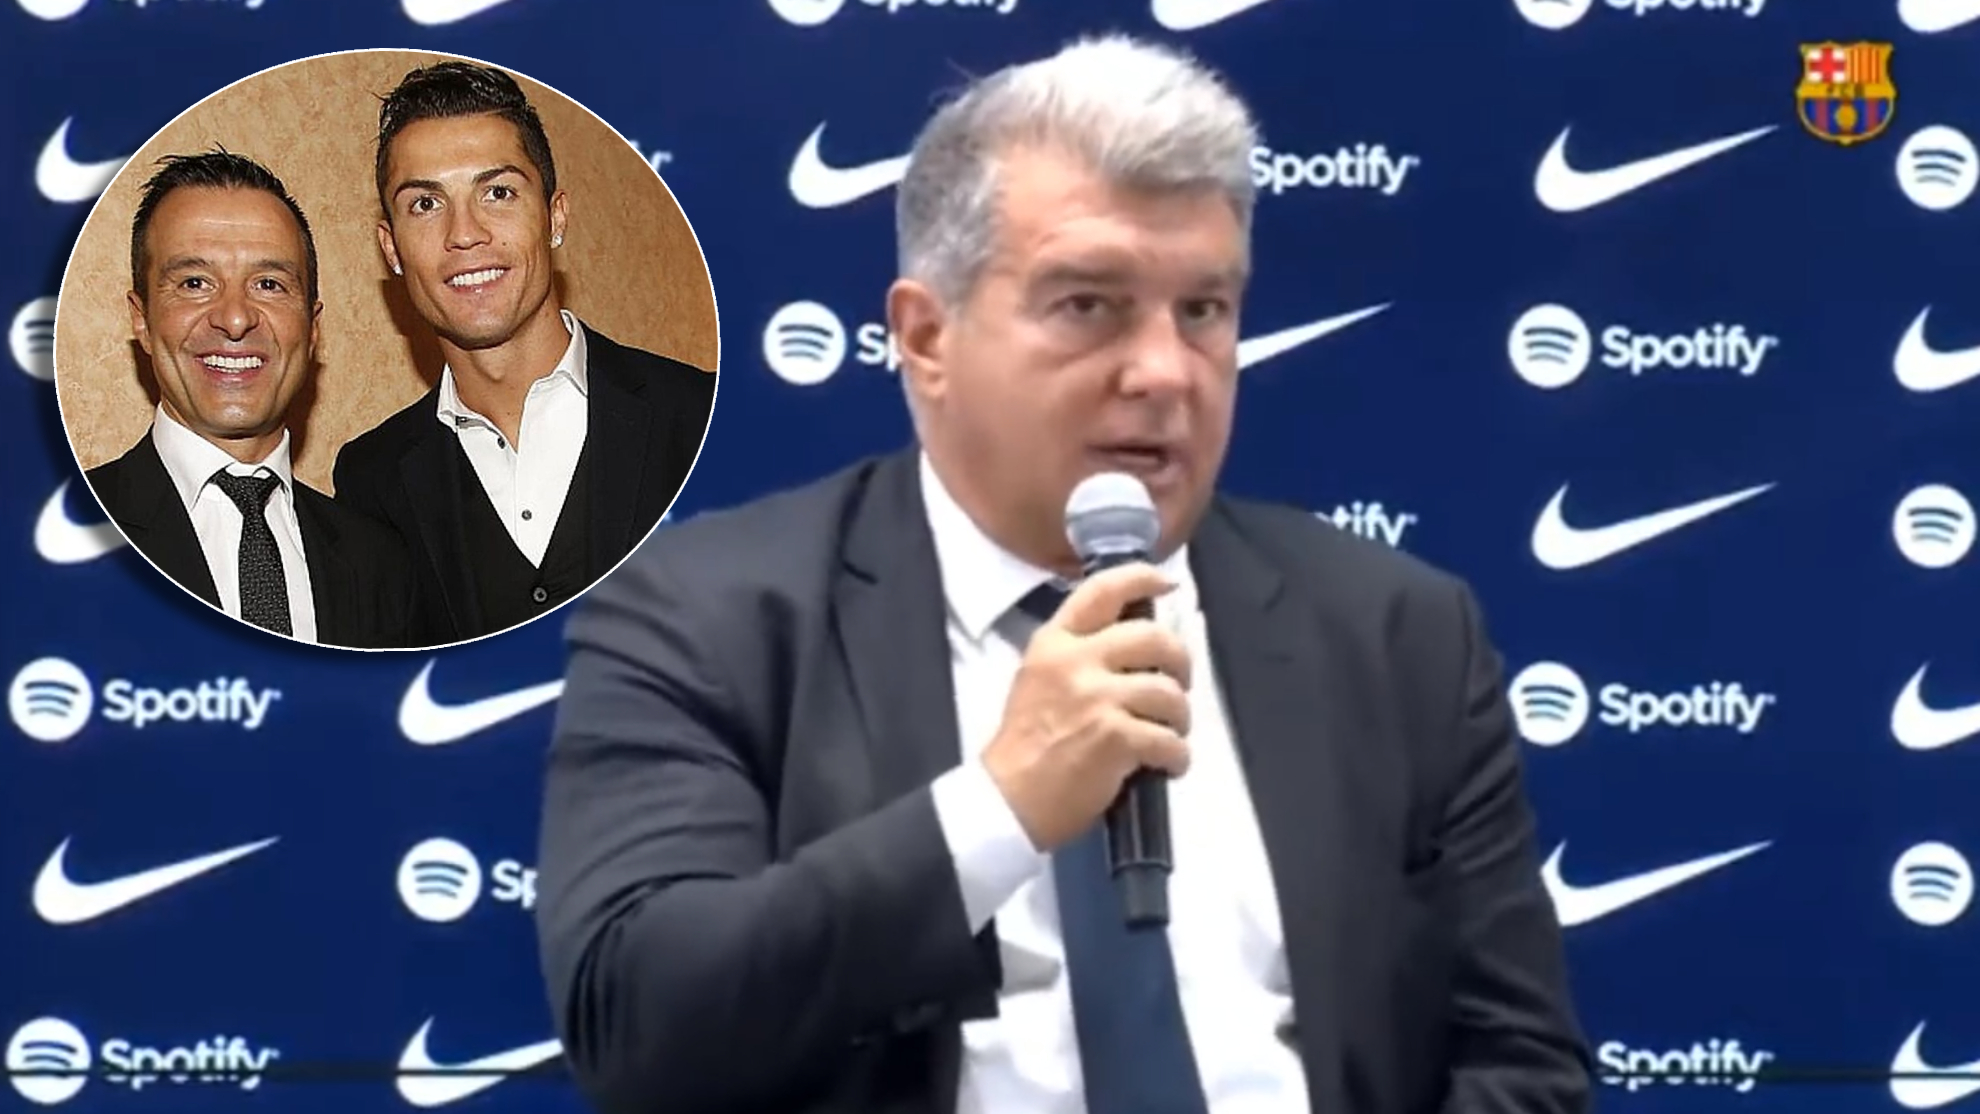 Laporta avoids questions on Cristiano Ronaldo after his dinner with Jorge Mendes